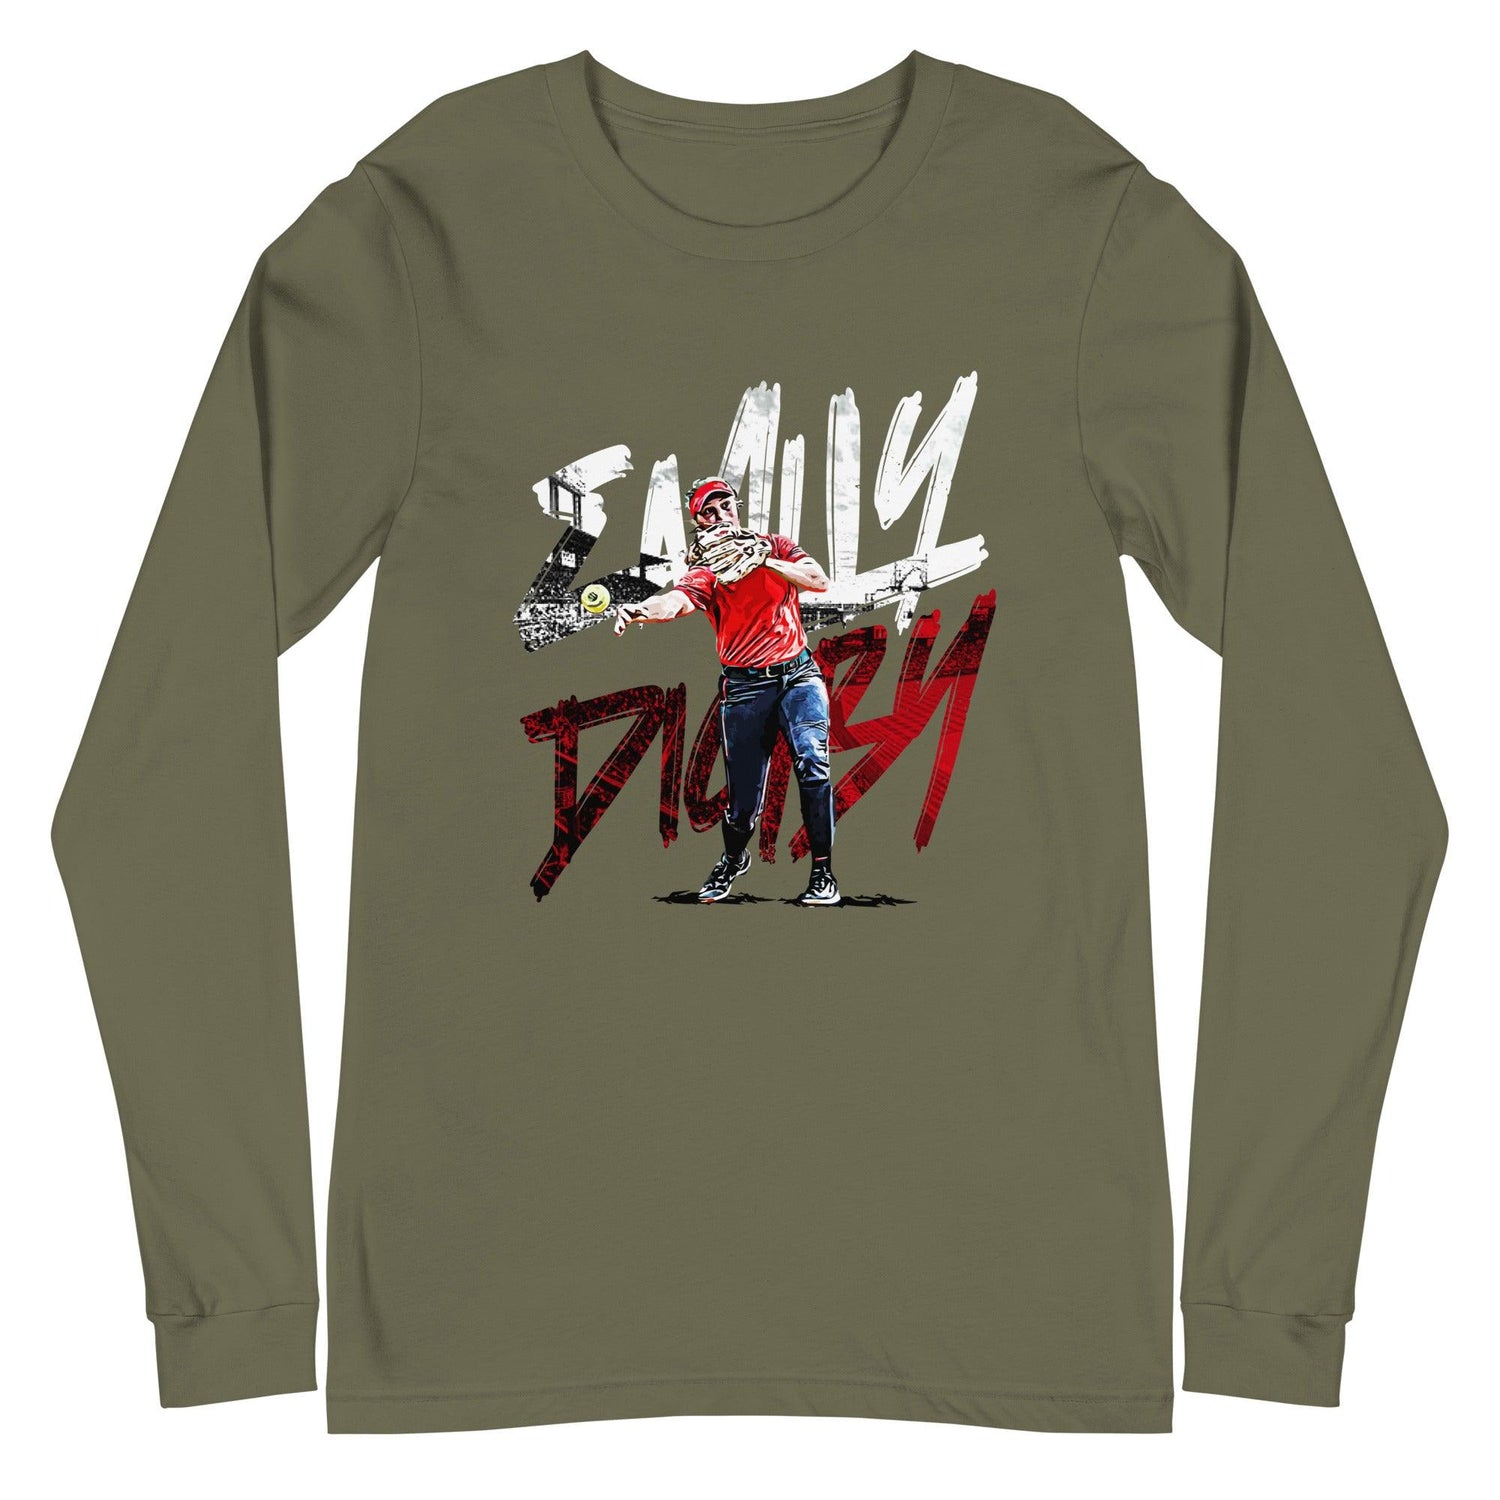 Emily Digby "Gameday" Long Sleeve Tee - Fan Arch